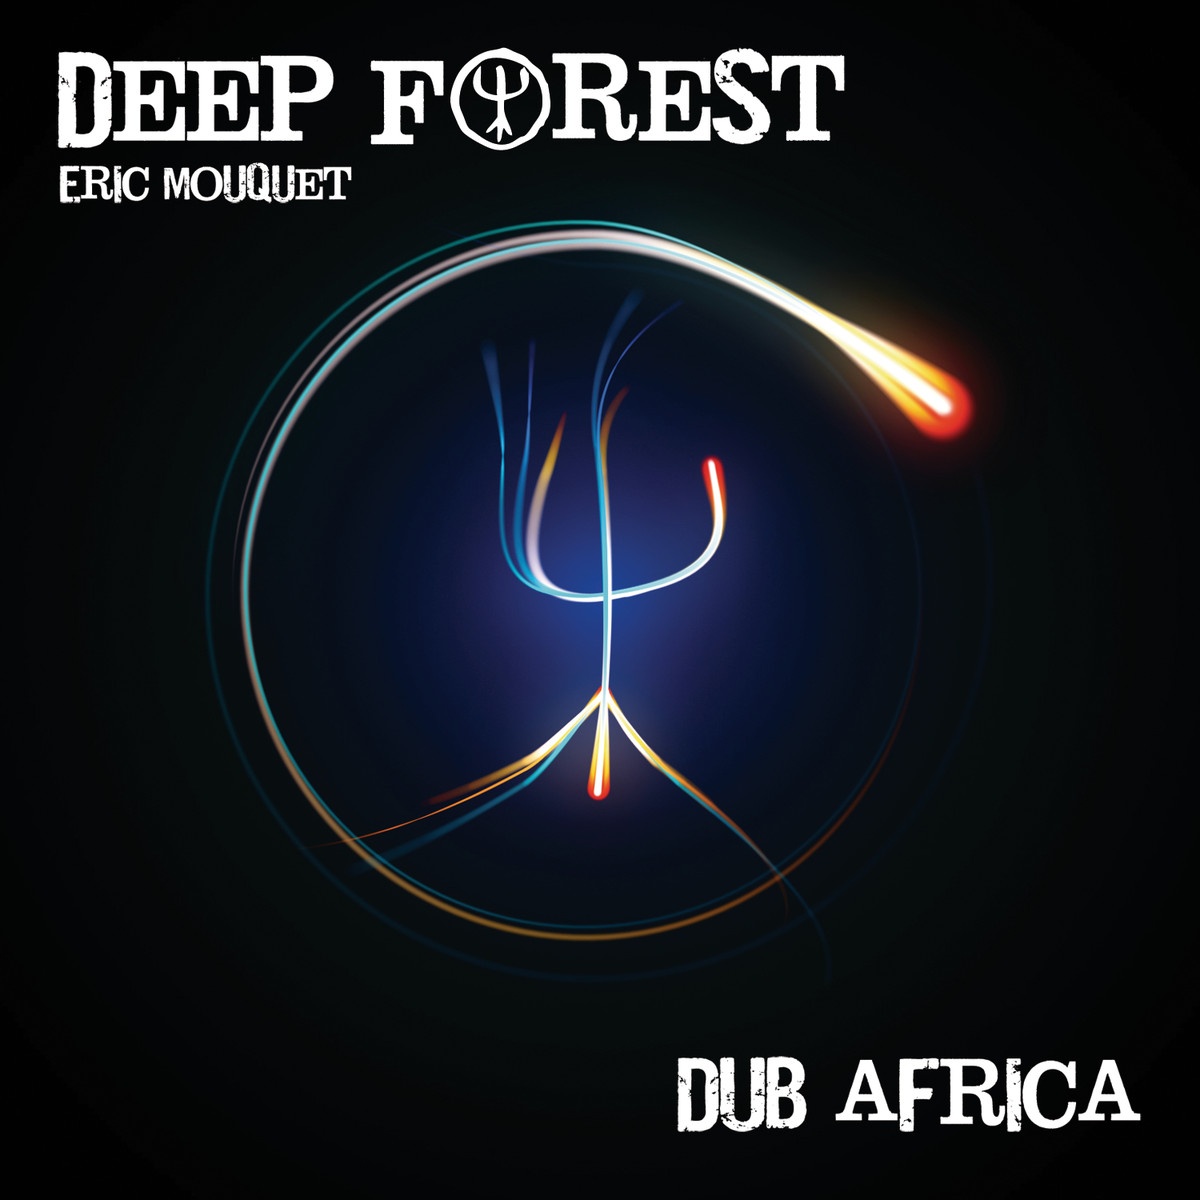 Dub Africa (Housemeisters Sax Touch Remix)